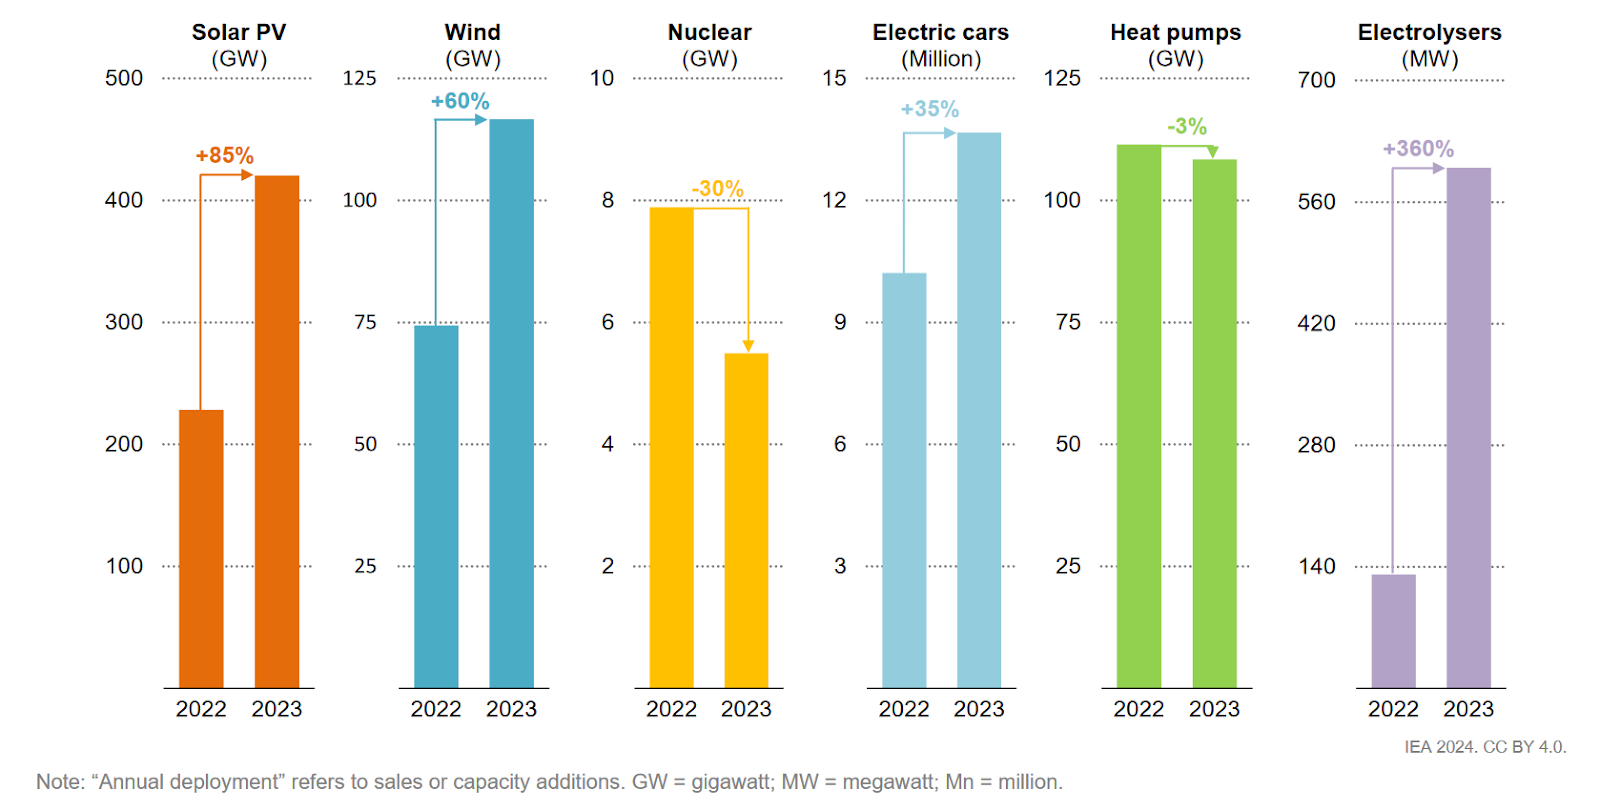 Annual Deployment of Selected Clean Energy Technologies, 2022 and 2023, Source: IEA